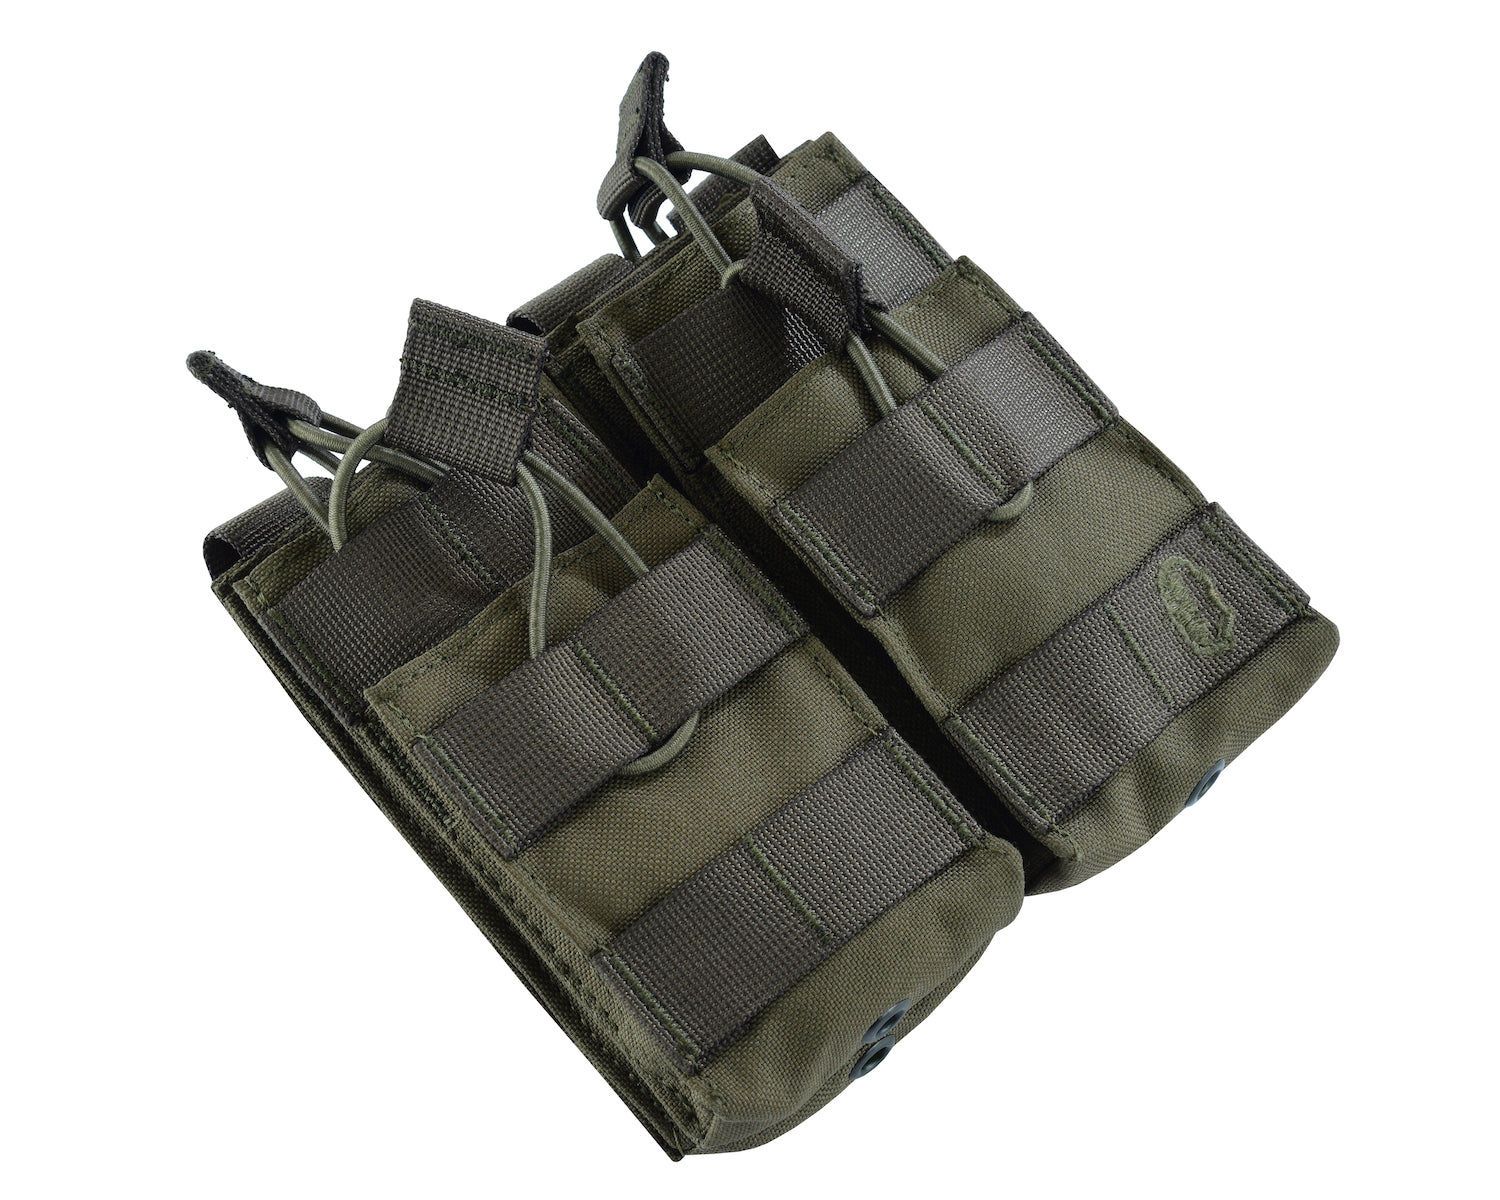 SHS - 996 STACKER OPEN-TOP MAG POUCH DOUBLE COLOUR AMRY GREEN